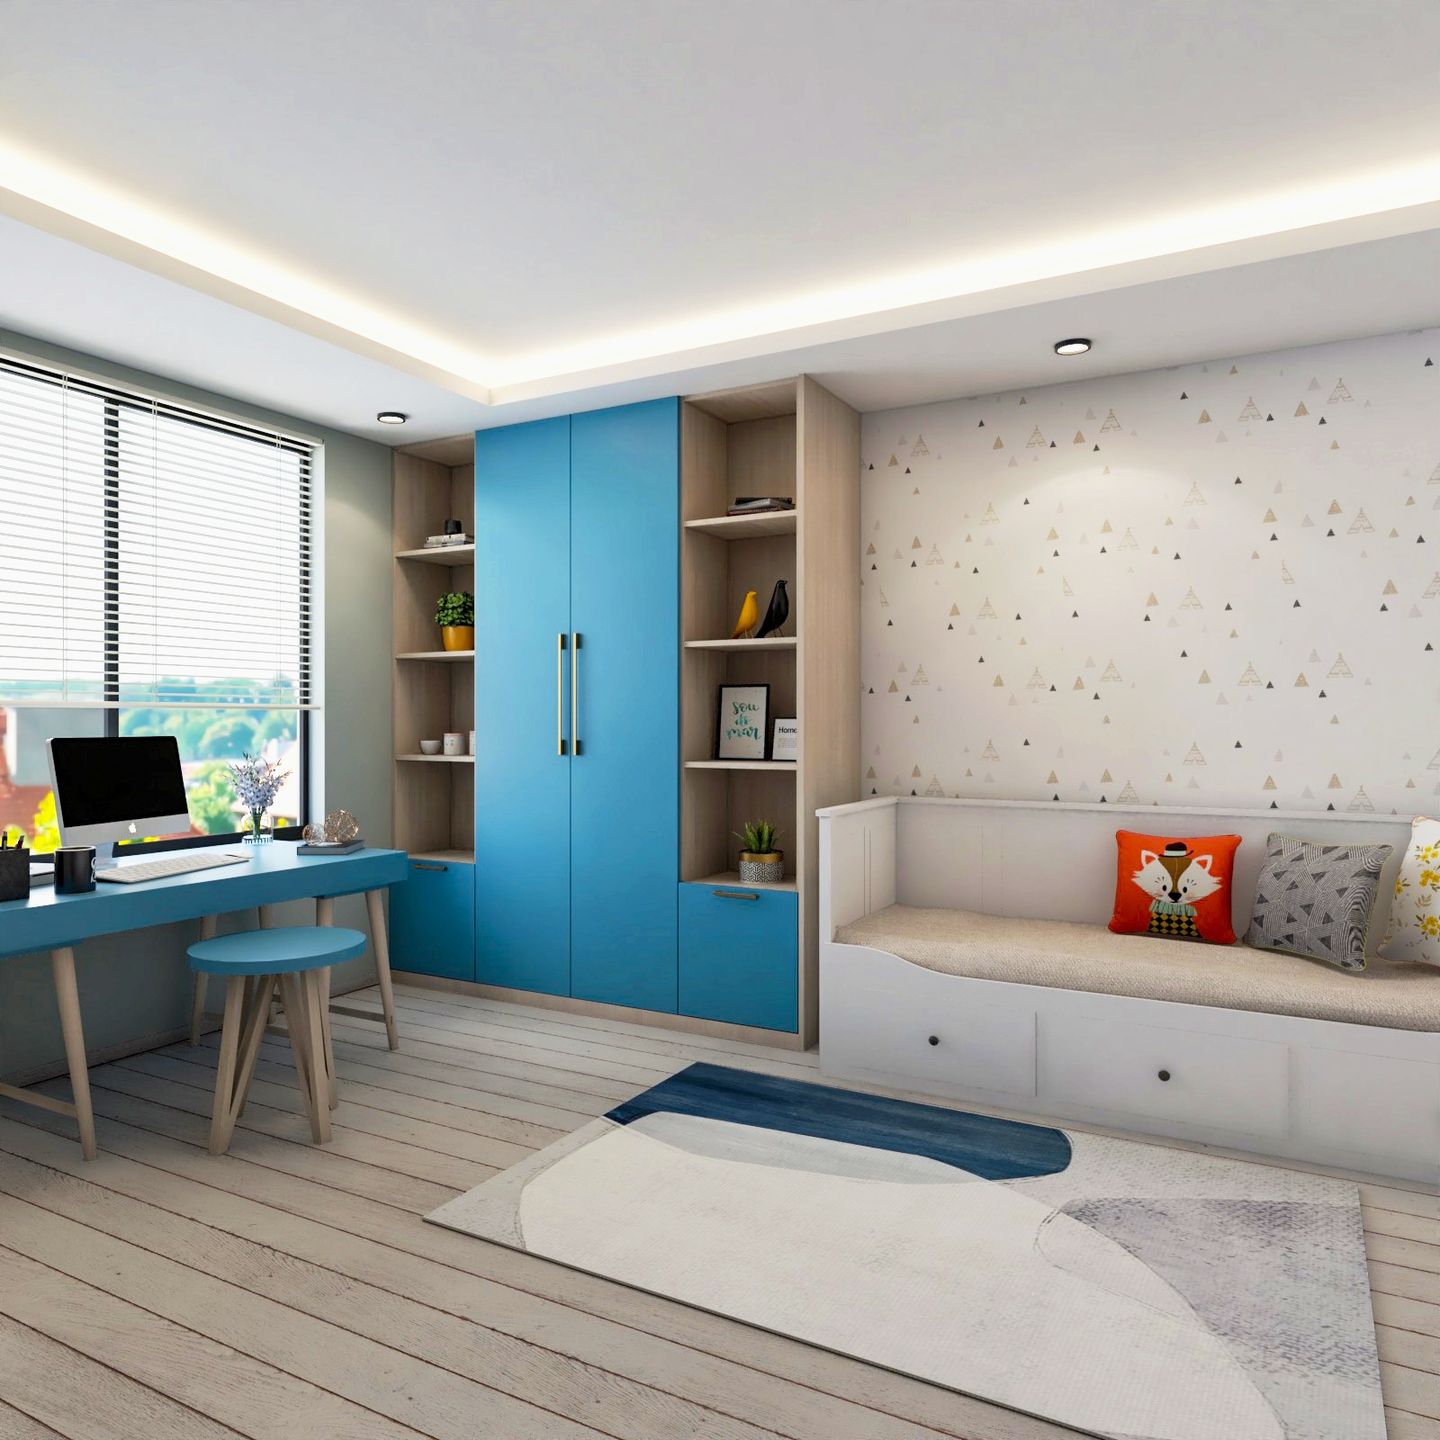 Kids Room Design With Blue And Wood Swing Wardrobe - Livspace